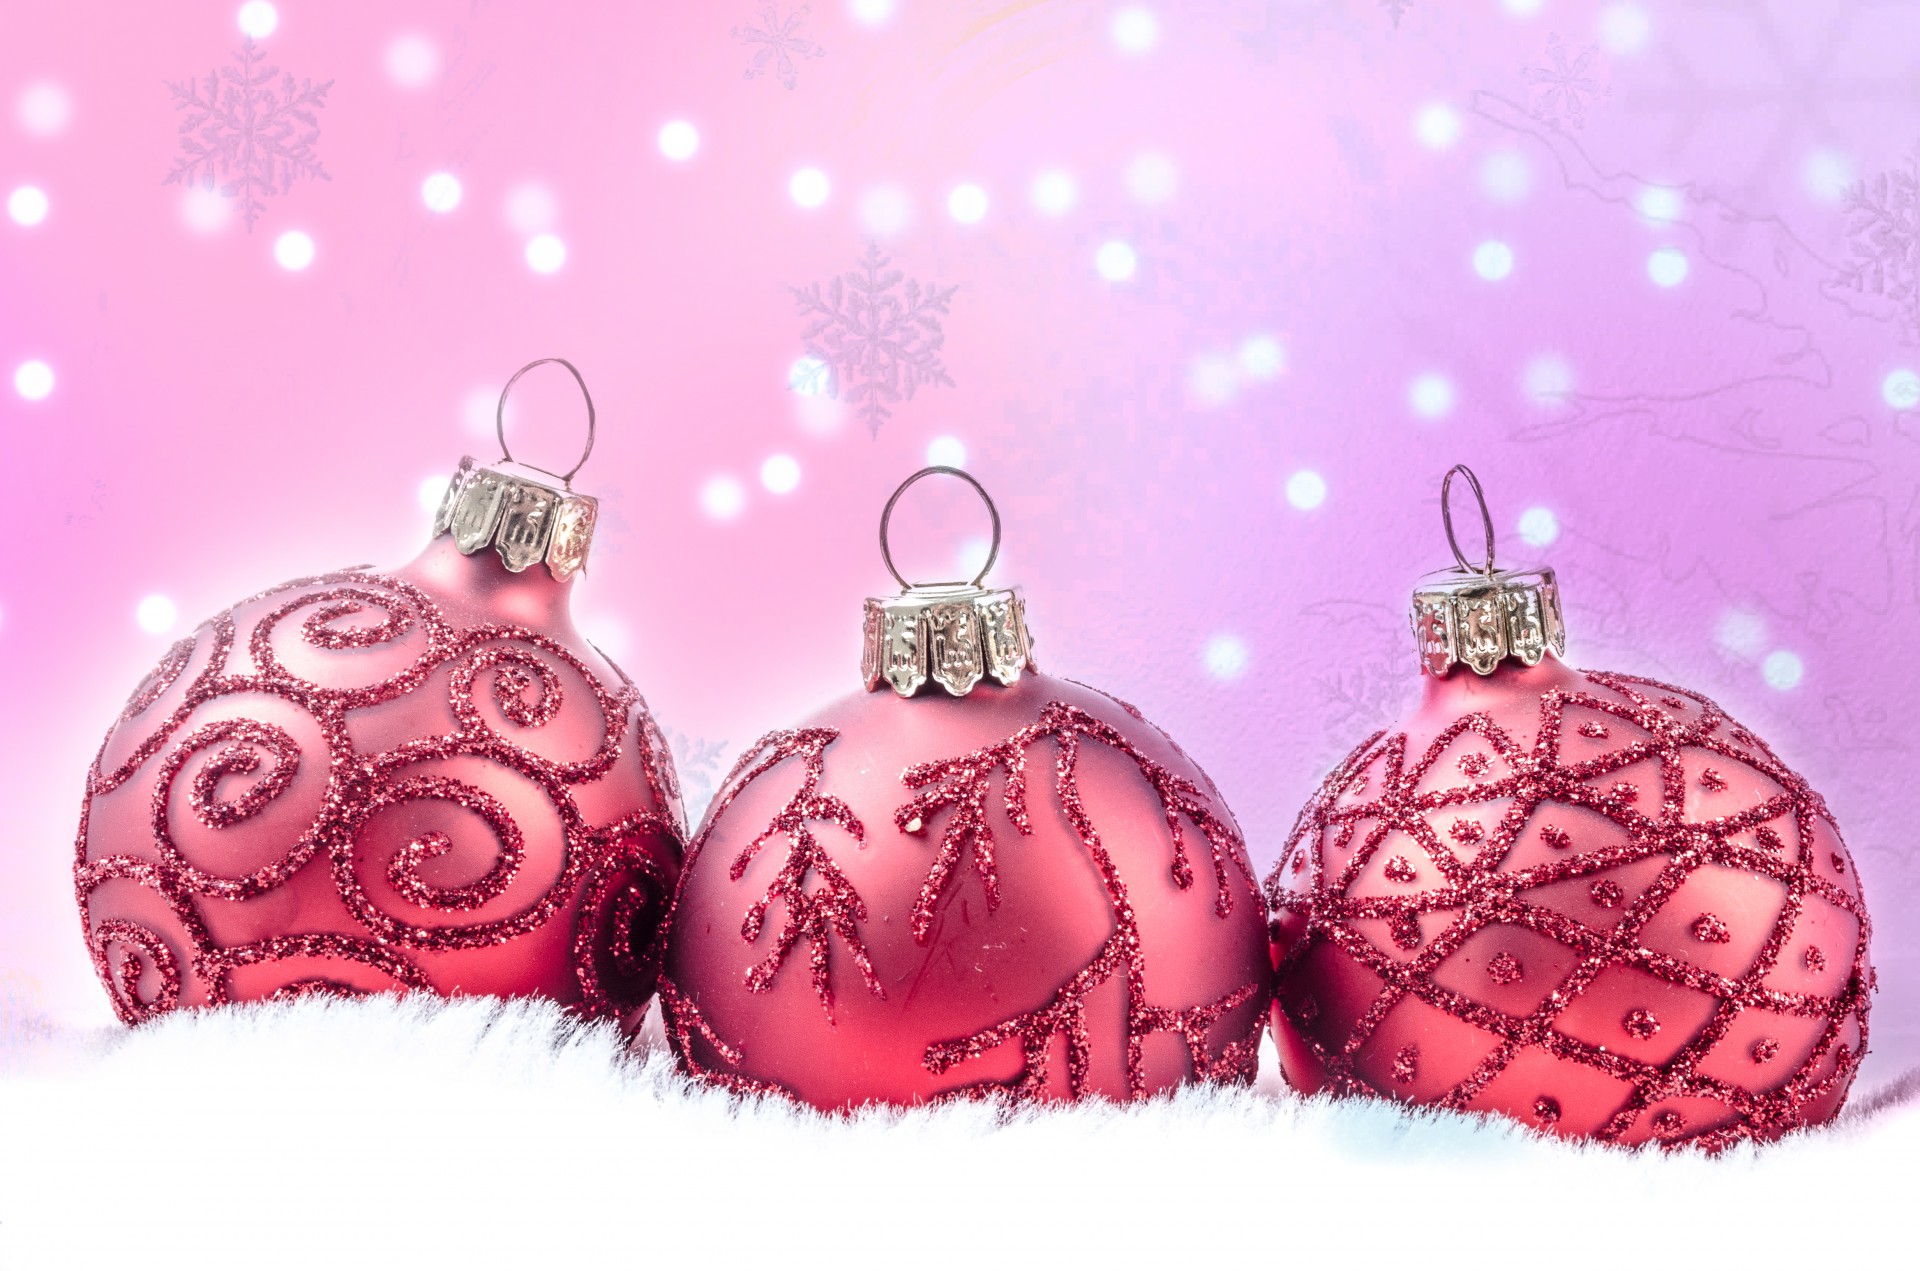 Pink Christmas Decorations by George Hodan